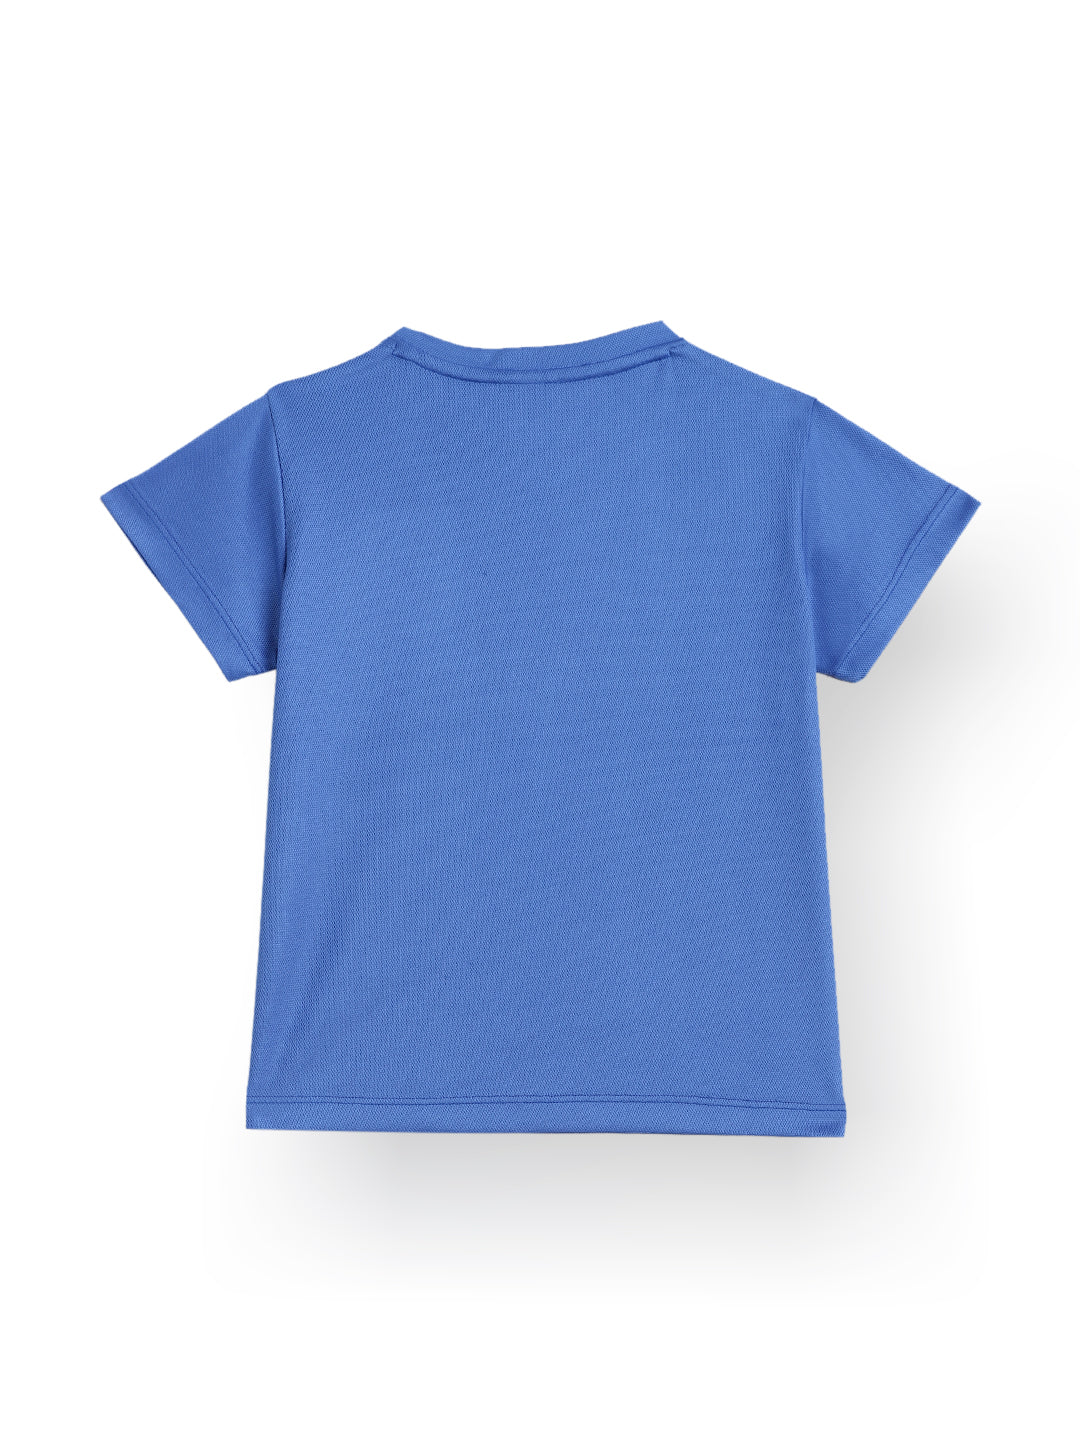 SPORTY COLLECTION SPORTY SHORT SLEEVE T-SHIRT - ROYAL